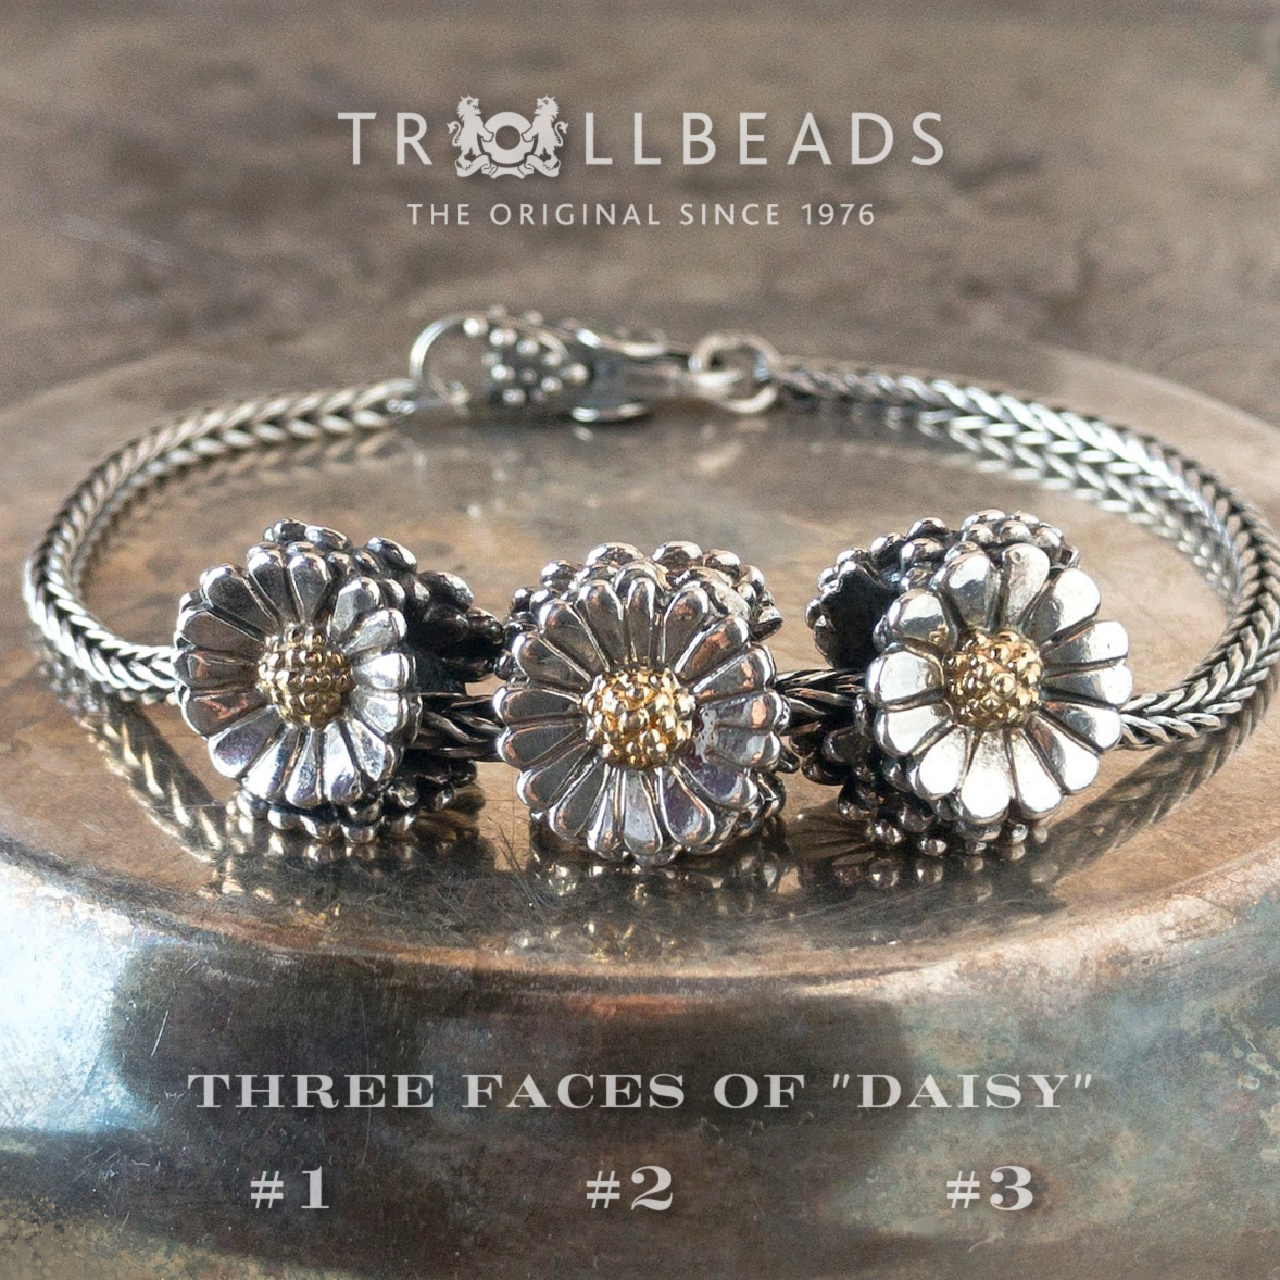 3 Trollbeads sterling silver and 18 karat gold "Daisy" beads on a sterling silver bracelet with clasp